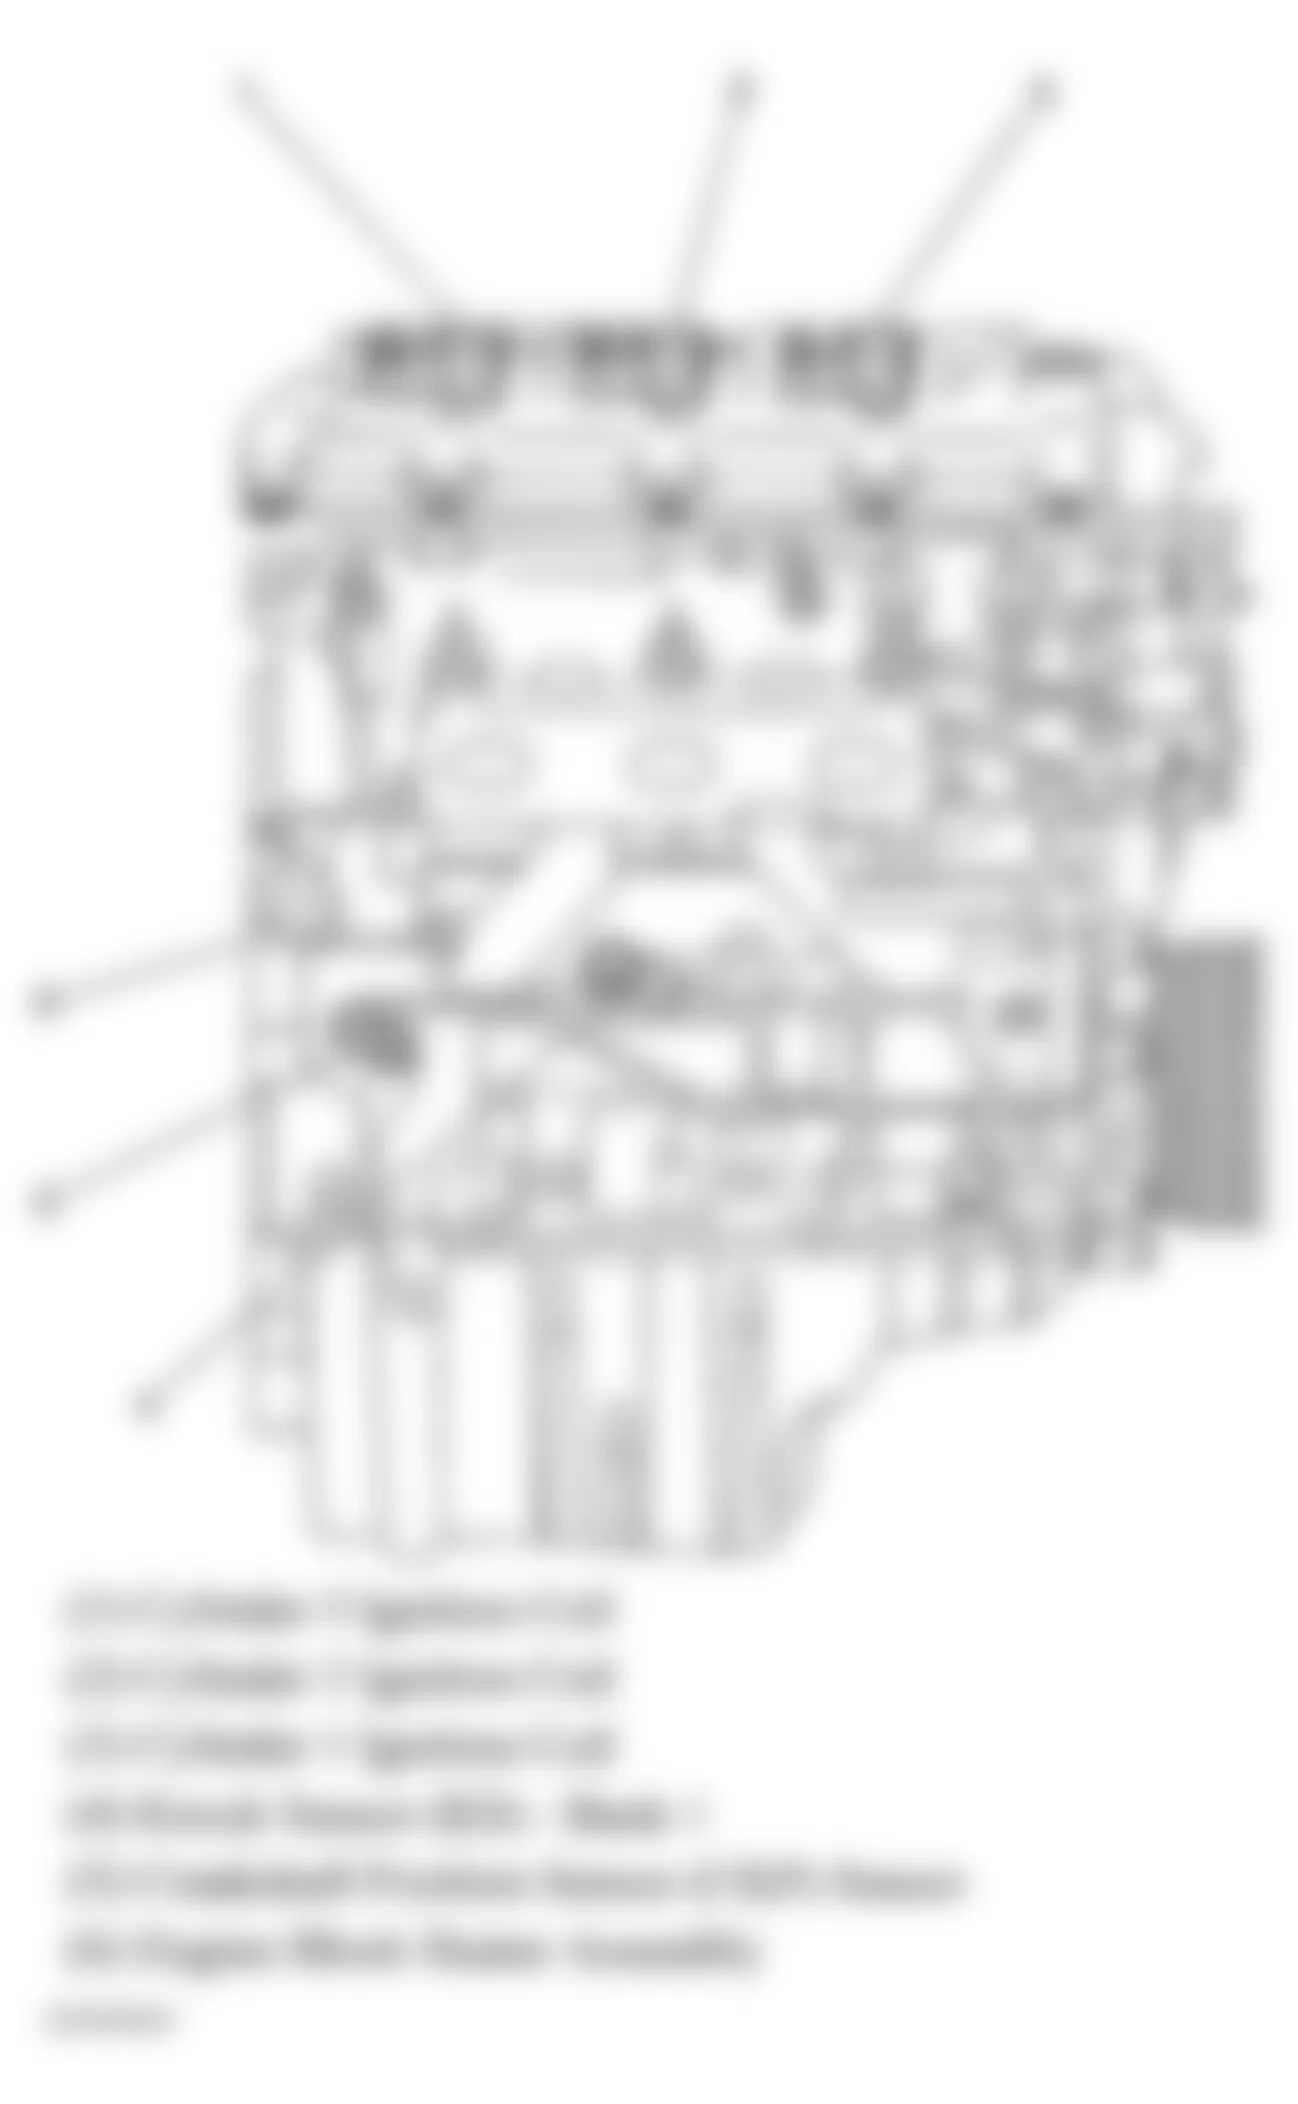 Buick Rendezvous CX 2005 - Component Locations -  Left Side Of Engine (3.6L)